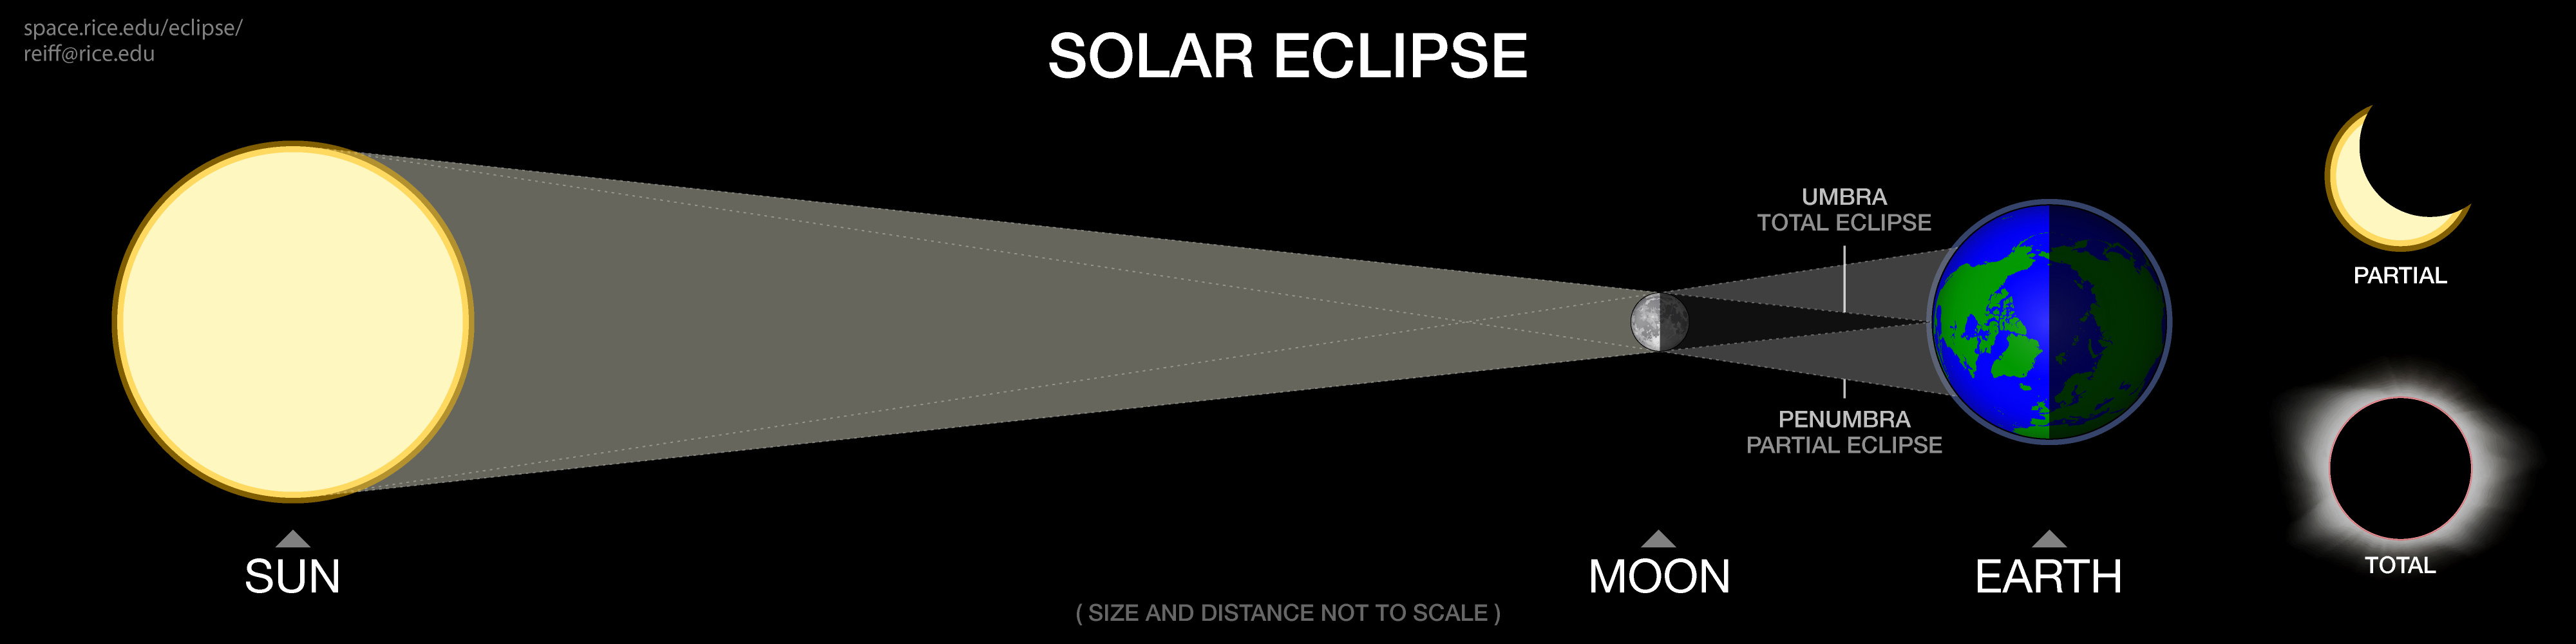 A diagram of a total solar eclipse. The Sun is on the left, the Moon in the middle, and the Earth on the right. The Moon is close enough to the Earth that the full light of the Sun is blocked for those in the path of totality, allowing those in the path on the Earth’s surface to view the Sun’s corona.